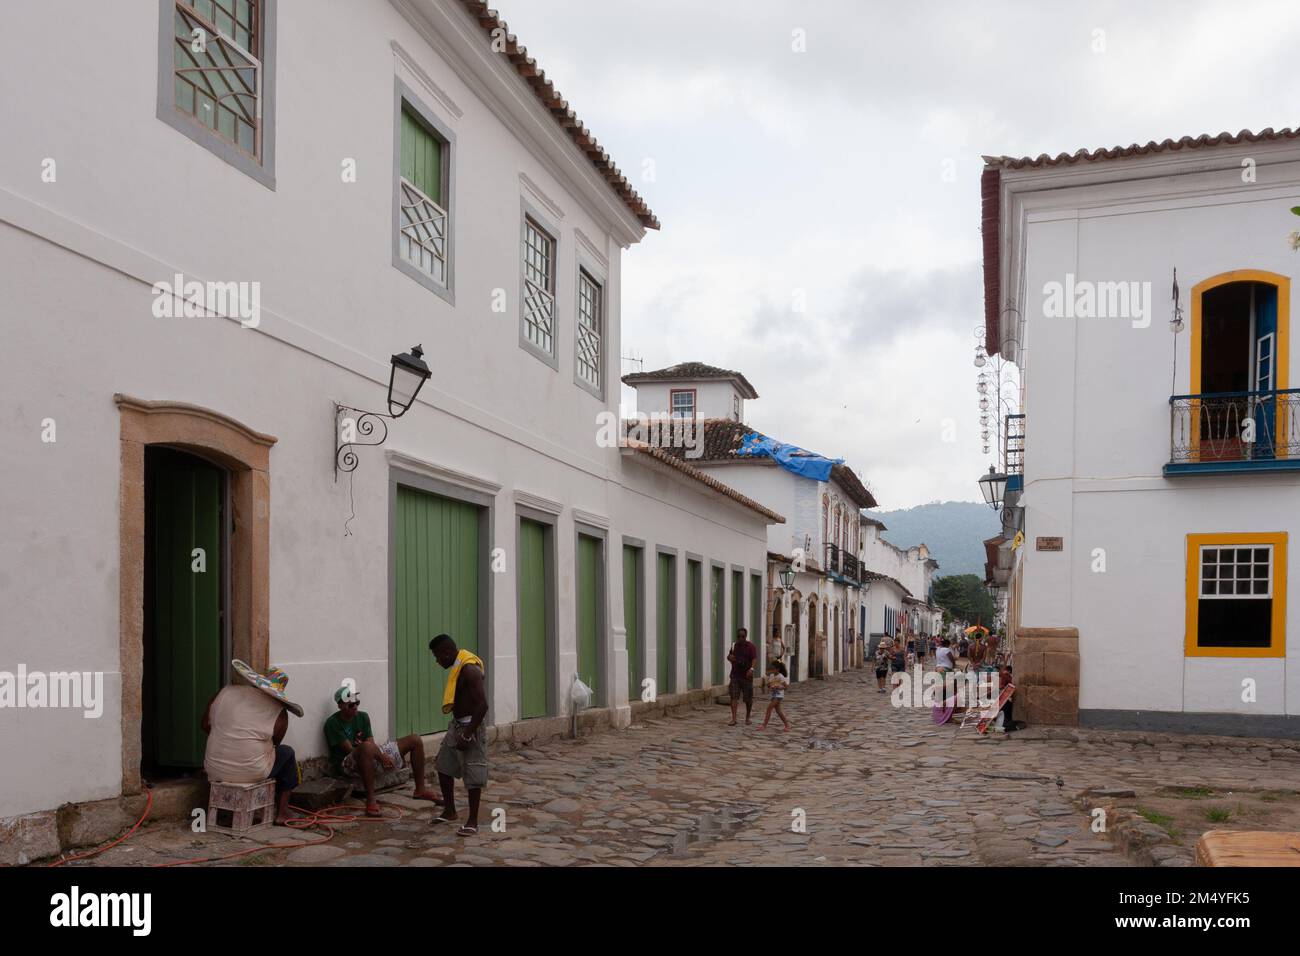 Paraty, RJ, Brazil. 27 December, 2012. A general view shows historic buildings and cobblestone paved streets in the Historic Center District of Paraty, Rio de Janeiro, Brazil. The historic center of Paraty, were inscribed on UNESCO World Heritage List in 2019 under the title 'Paraty and Ilha Grande'. Stock Photo